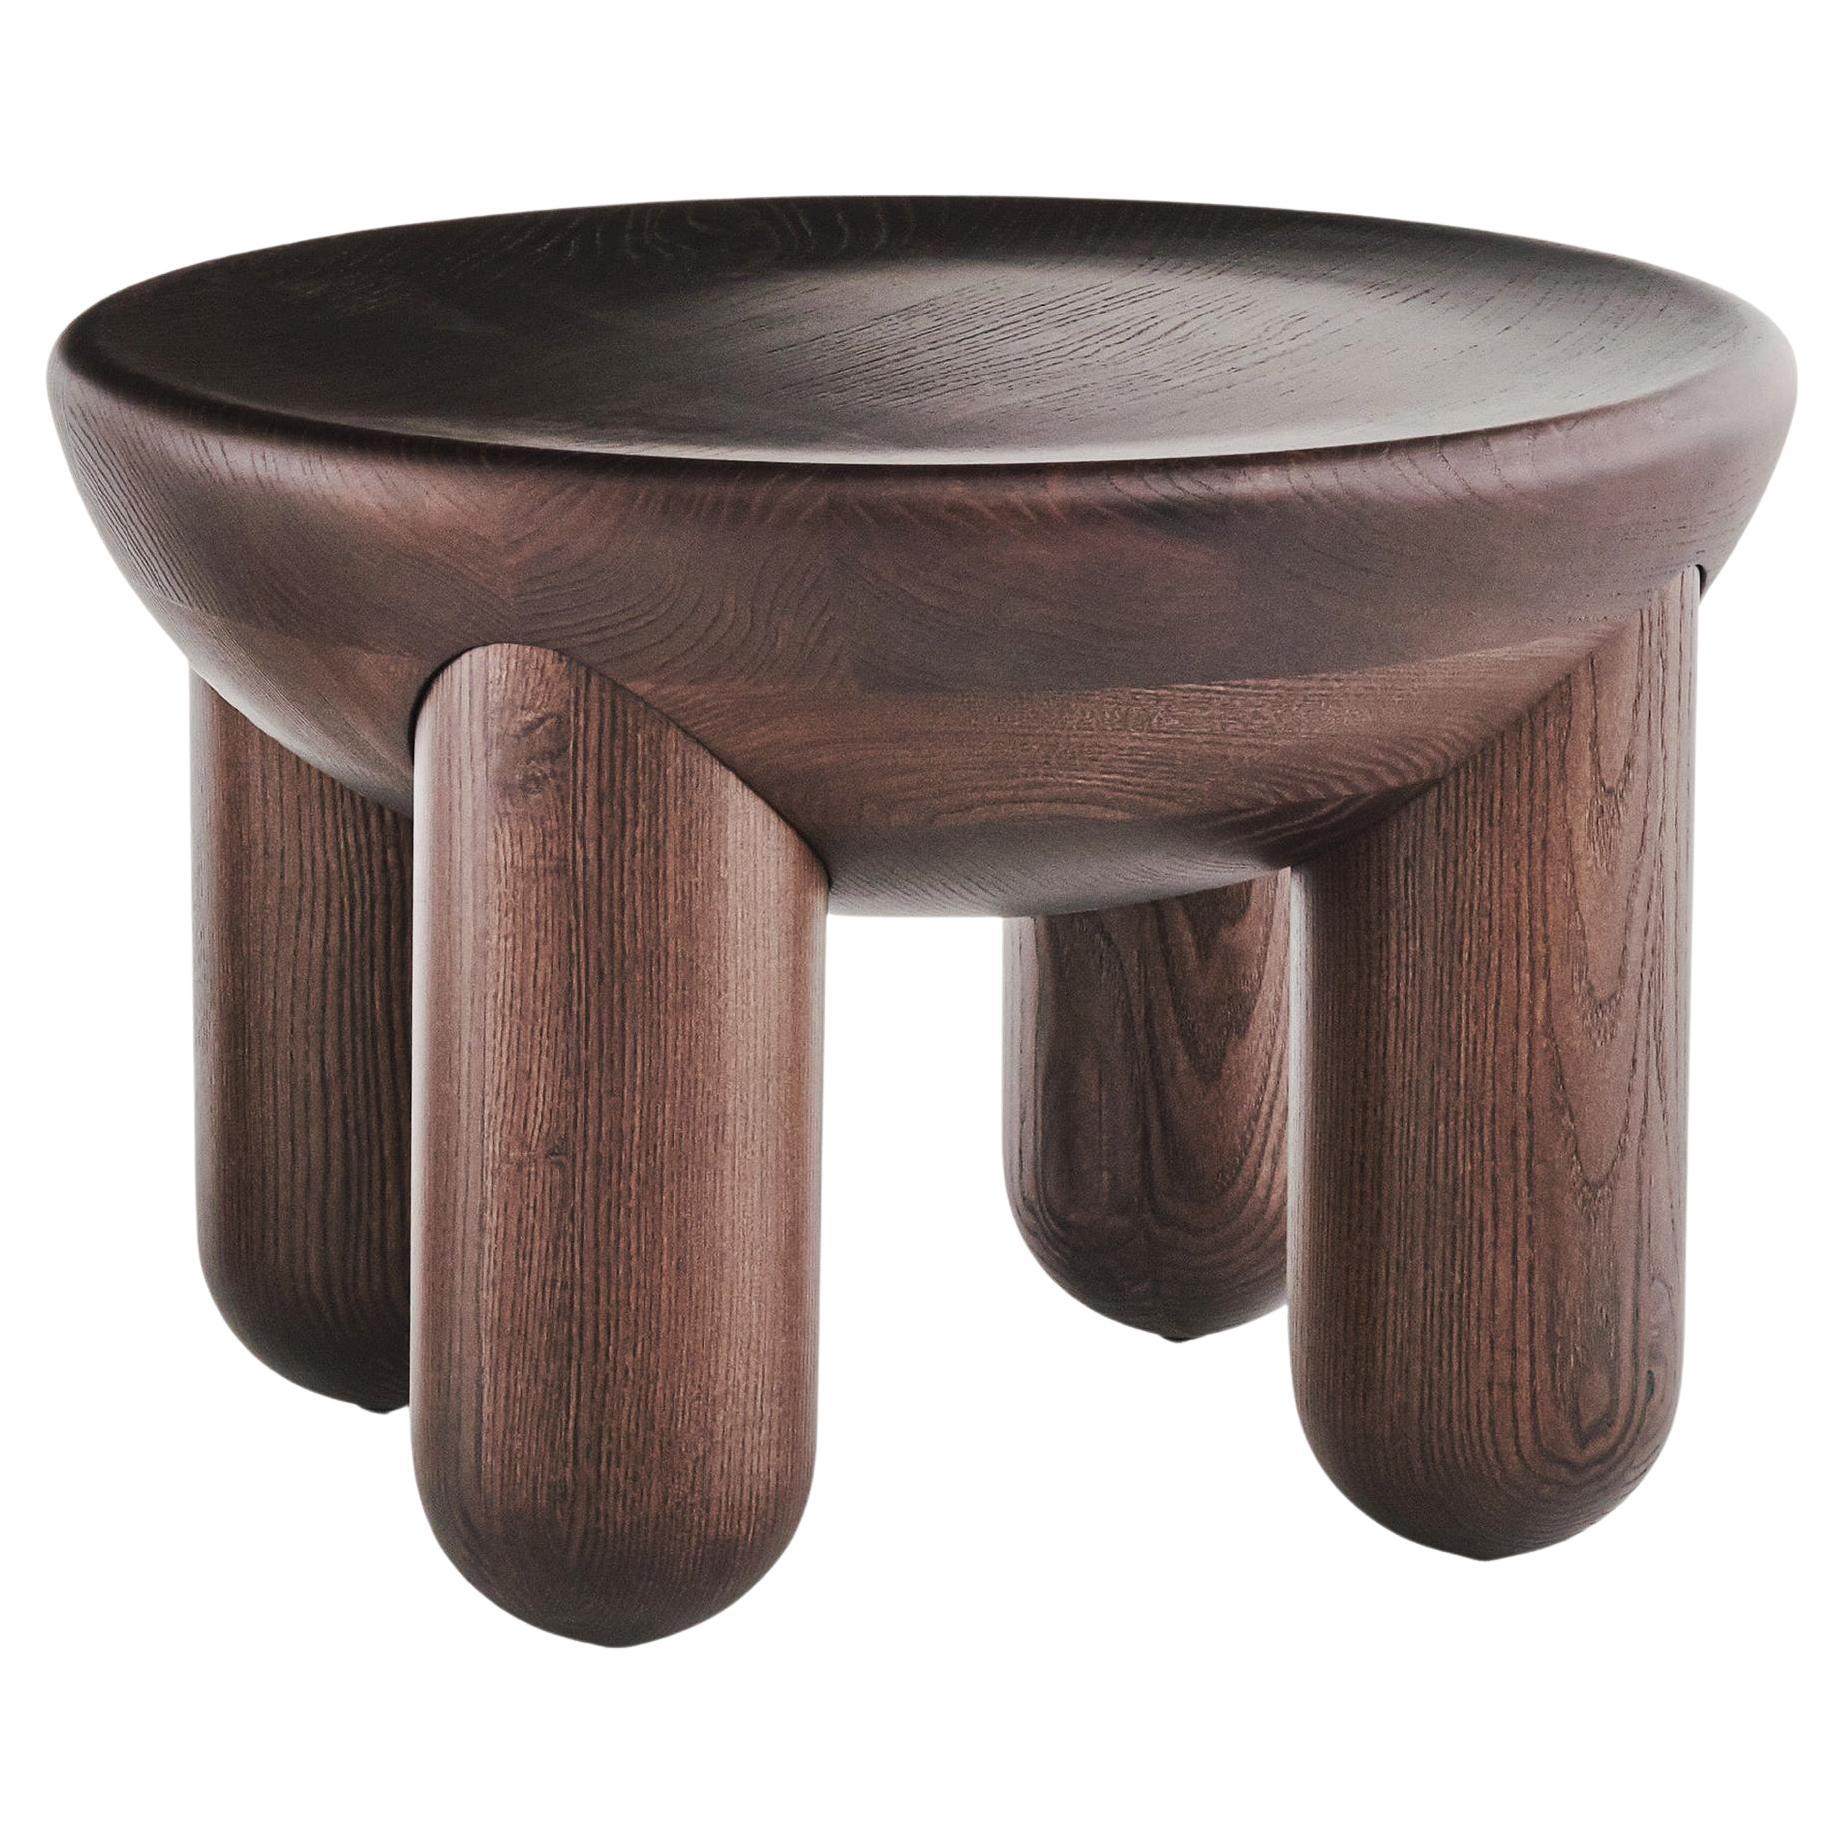 Contemporary Wooden Coffee or Side Table 'Freyja 1' by Noom, Brown Stained Ash For Sale